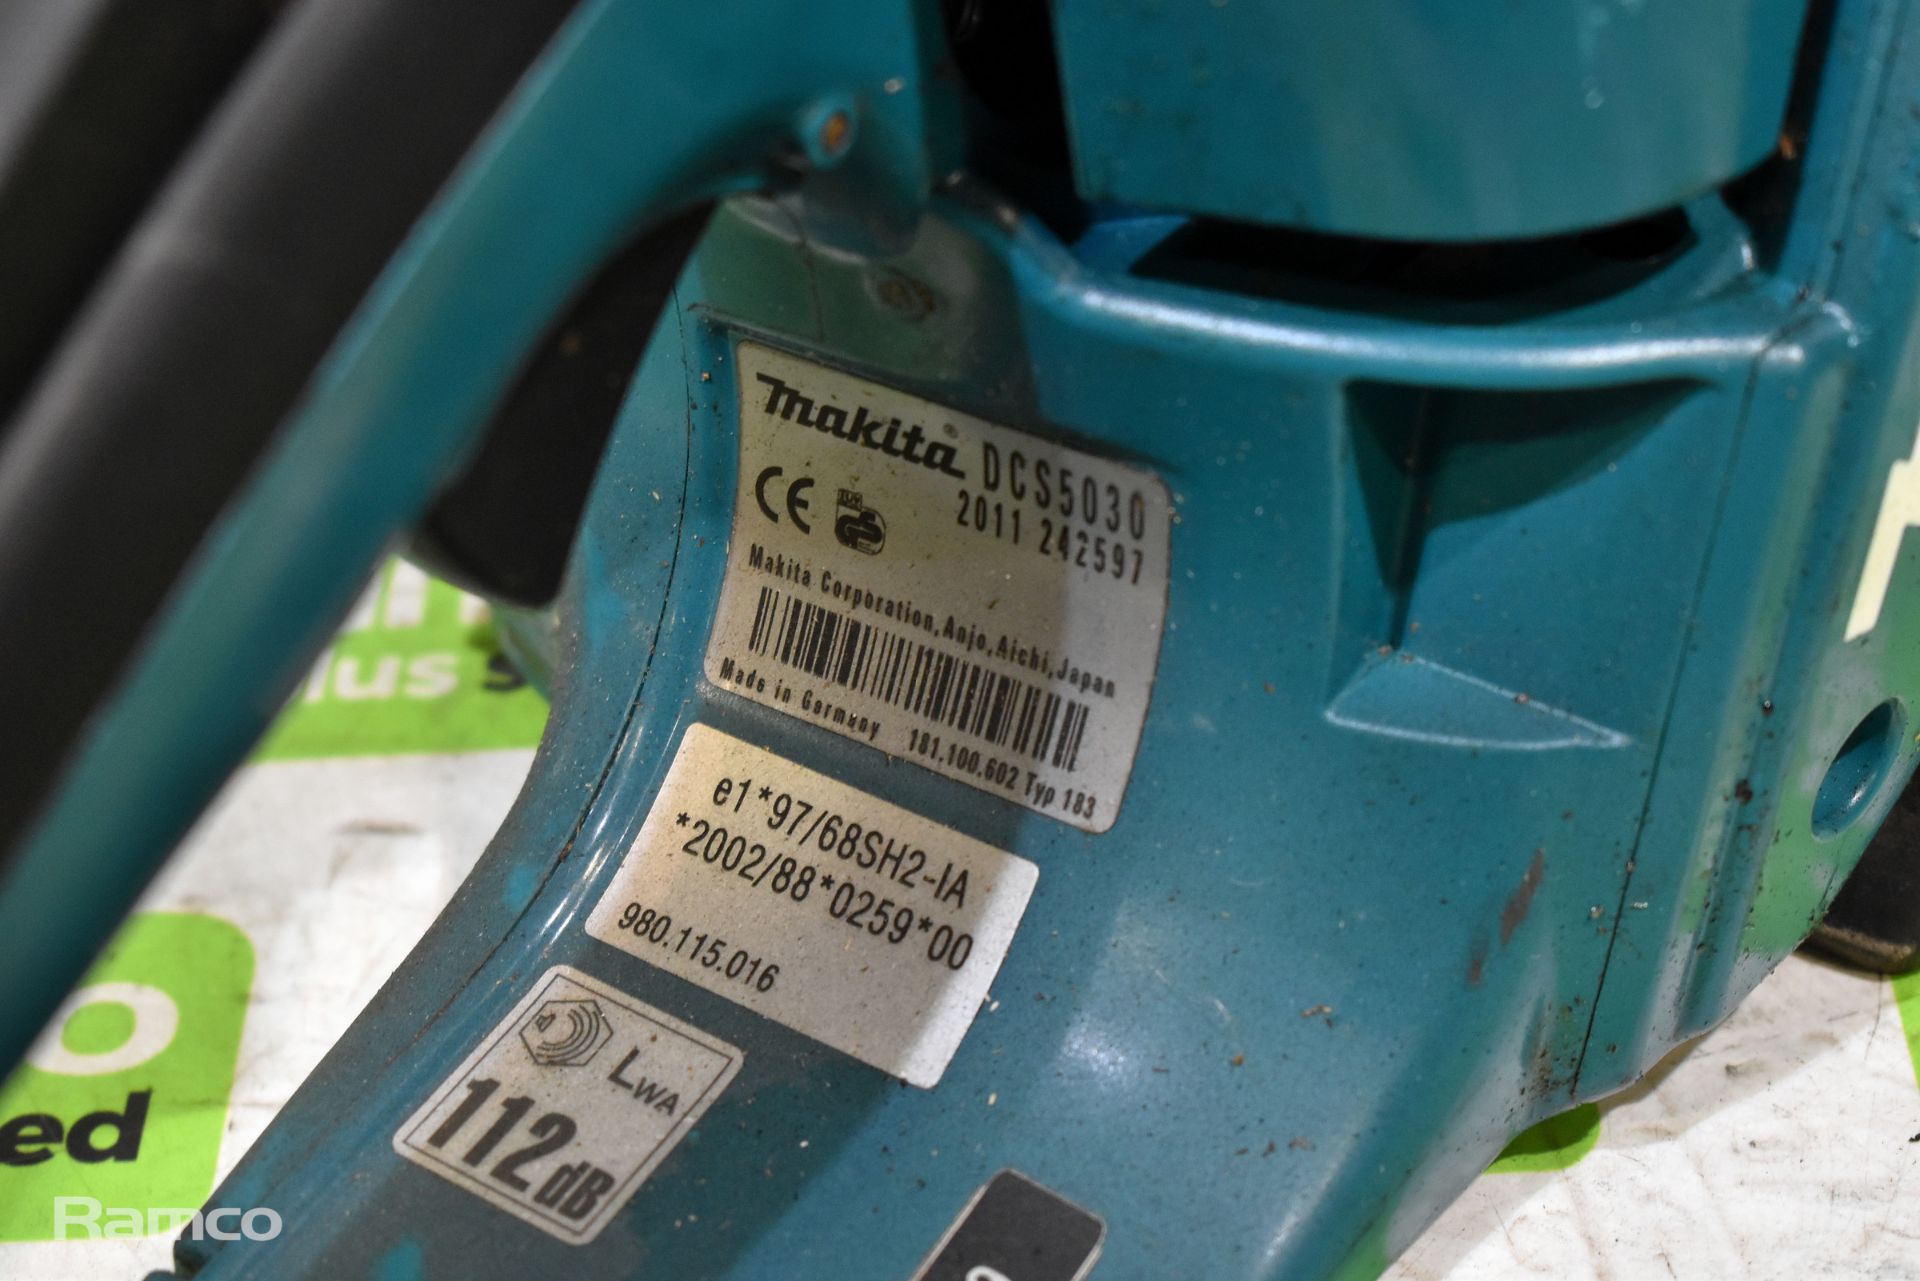 Makita DCS5030 50cc petrol chainsaw - BODY ONLY - Image 4 of 5